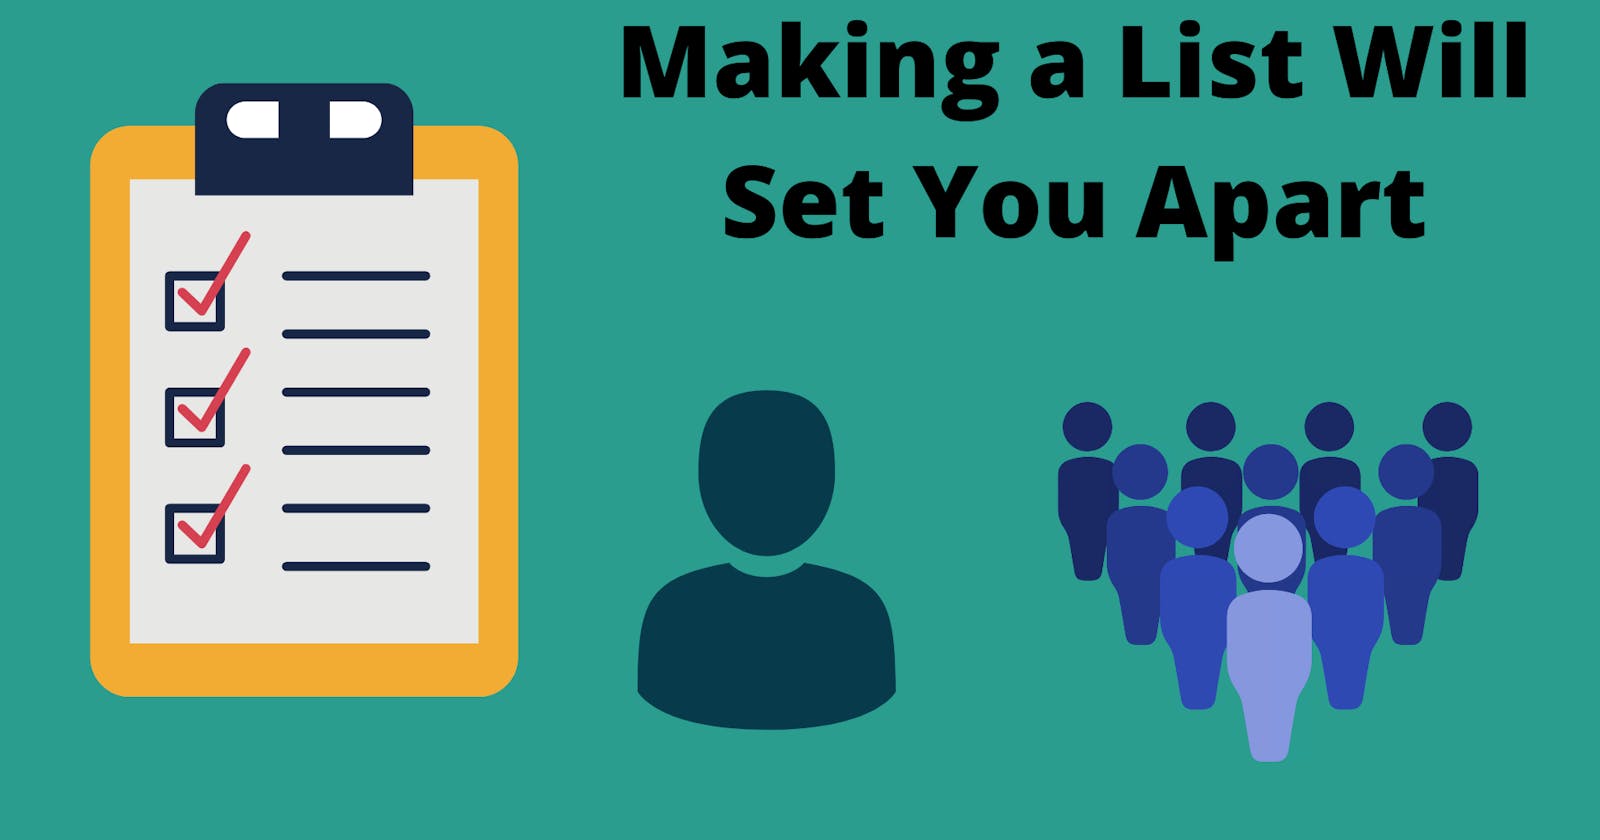 Making a List Will Set You Apart